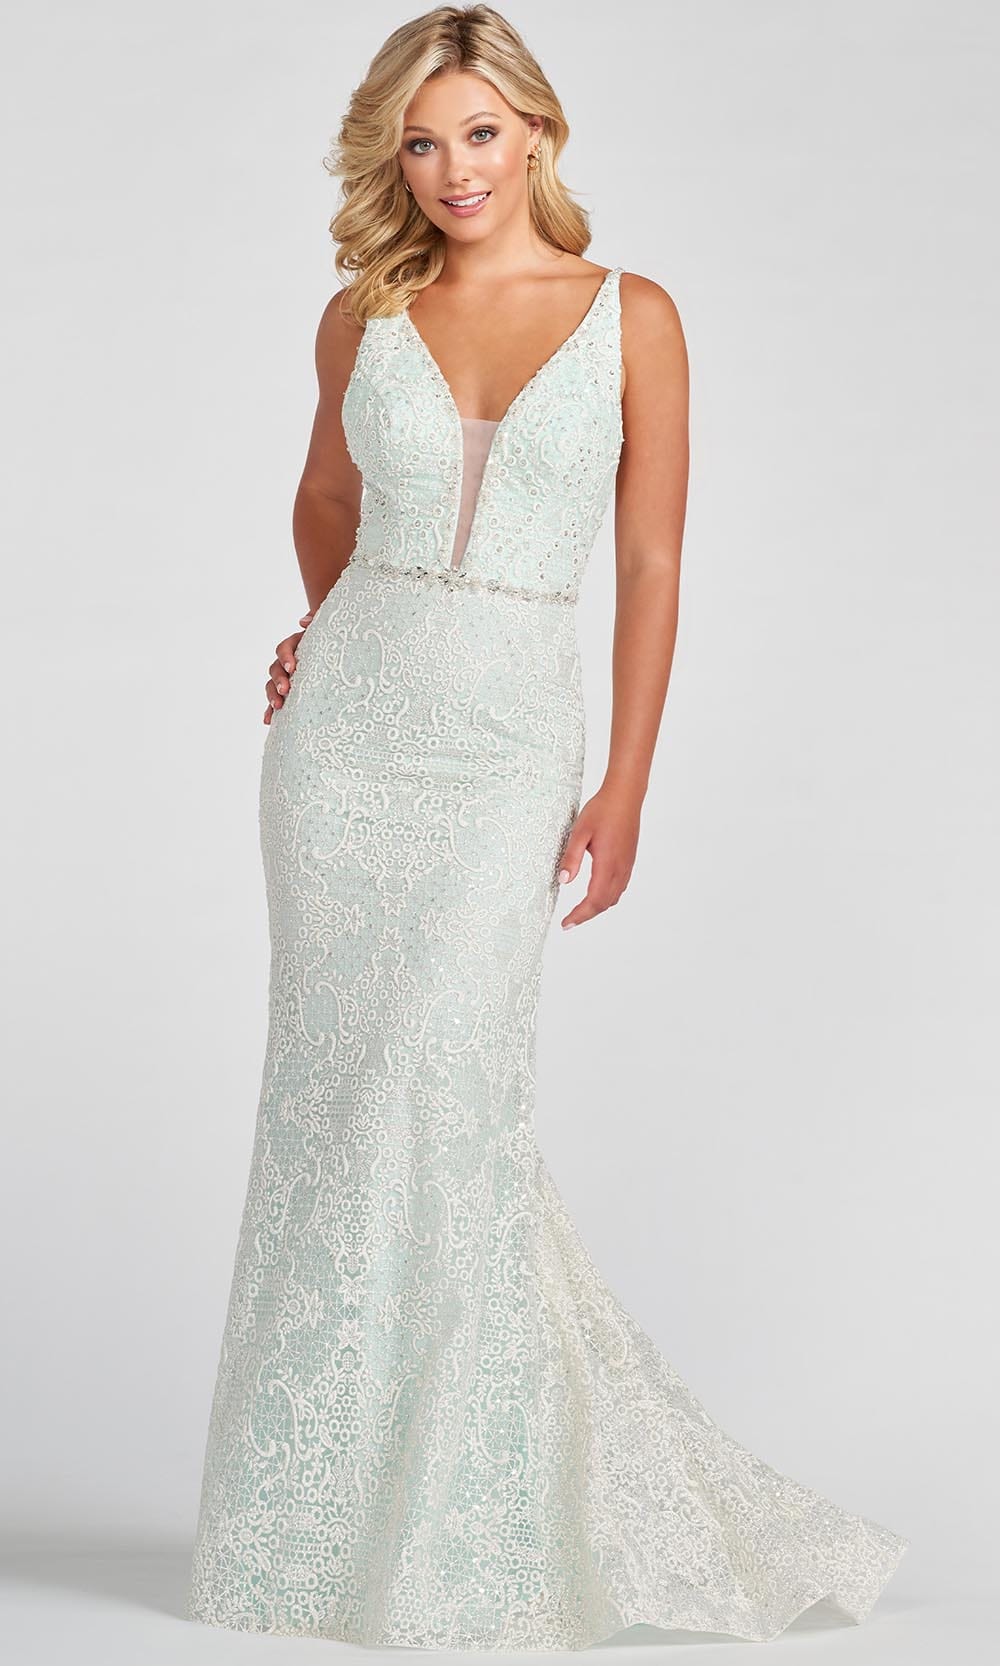 Ellie Wilde EW122116 - Cracked Ice With Beading Accents Mermaid Gown Prom Dresses 00 / Ivory/Sea Mist